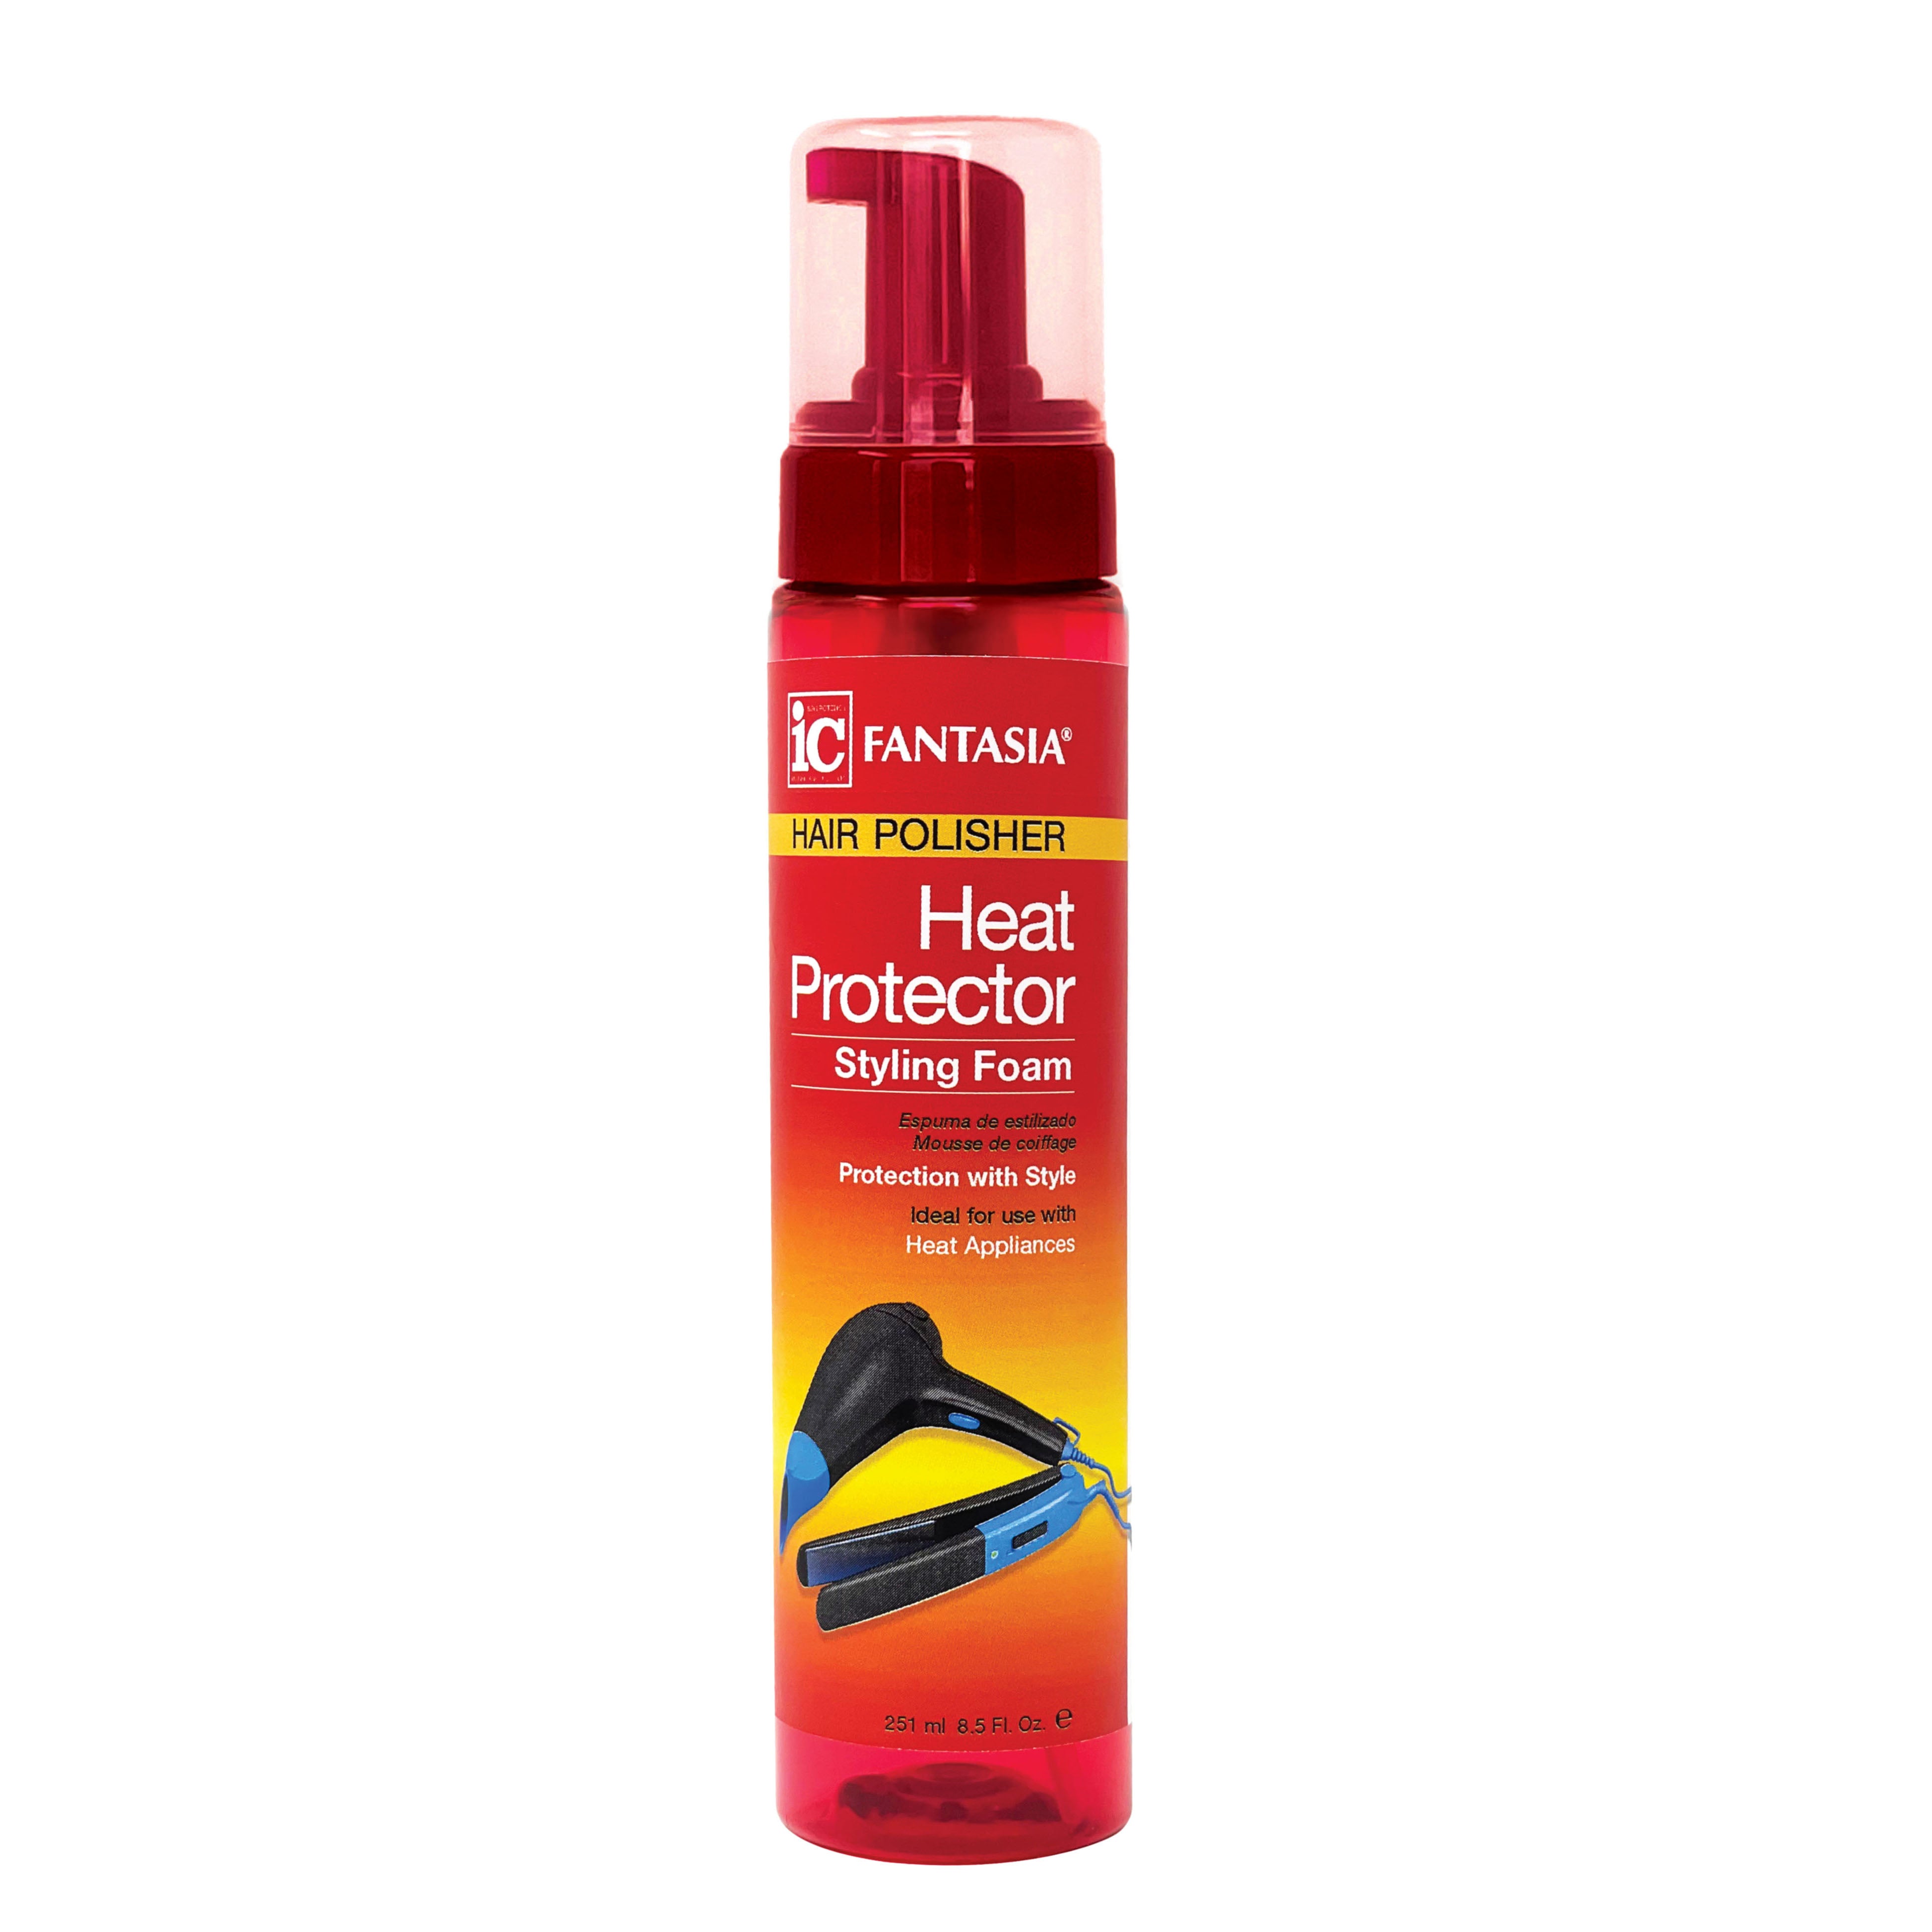 Care FOAM NEW! PROTECTOR STYLING HEAT OZ) Industries - Hair (8.5 Fantasia –